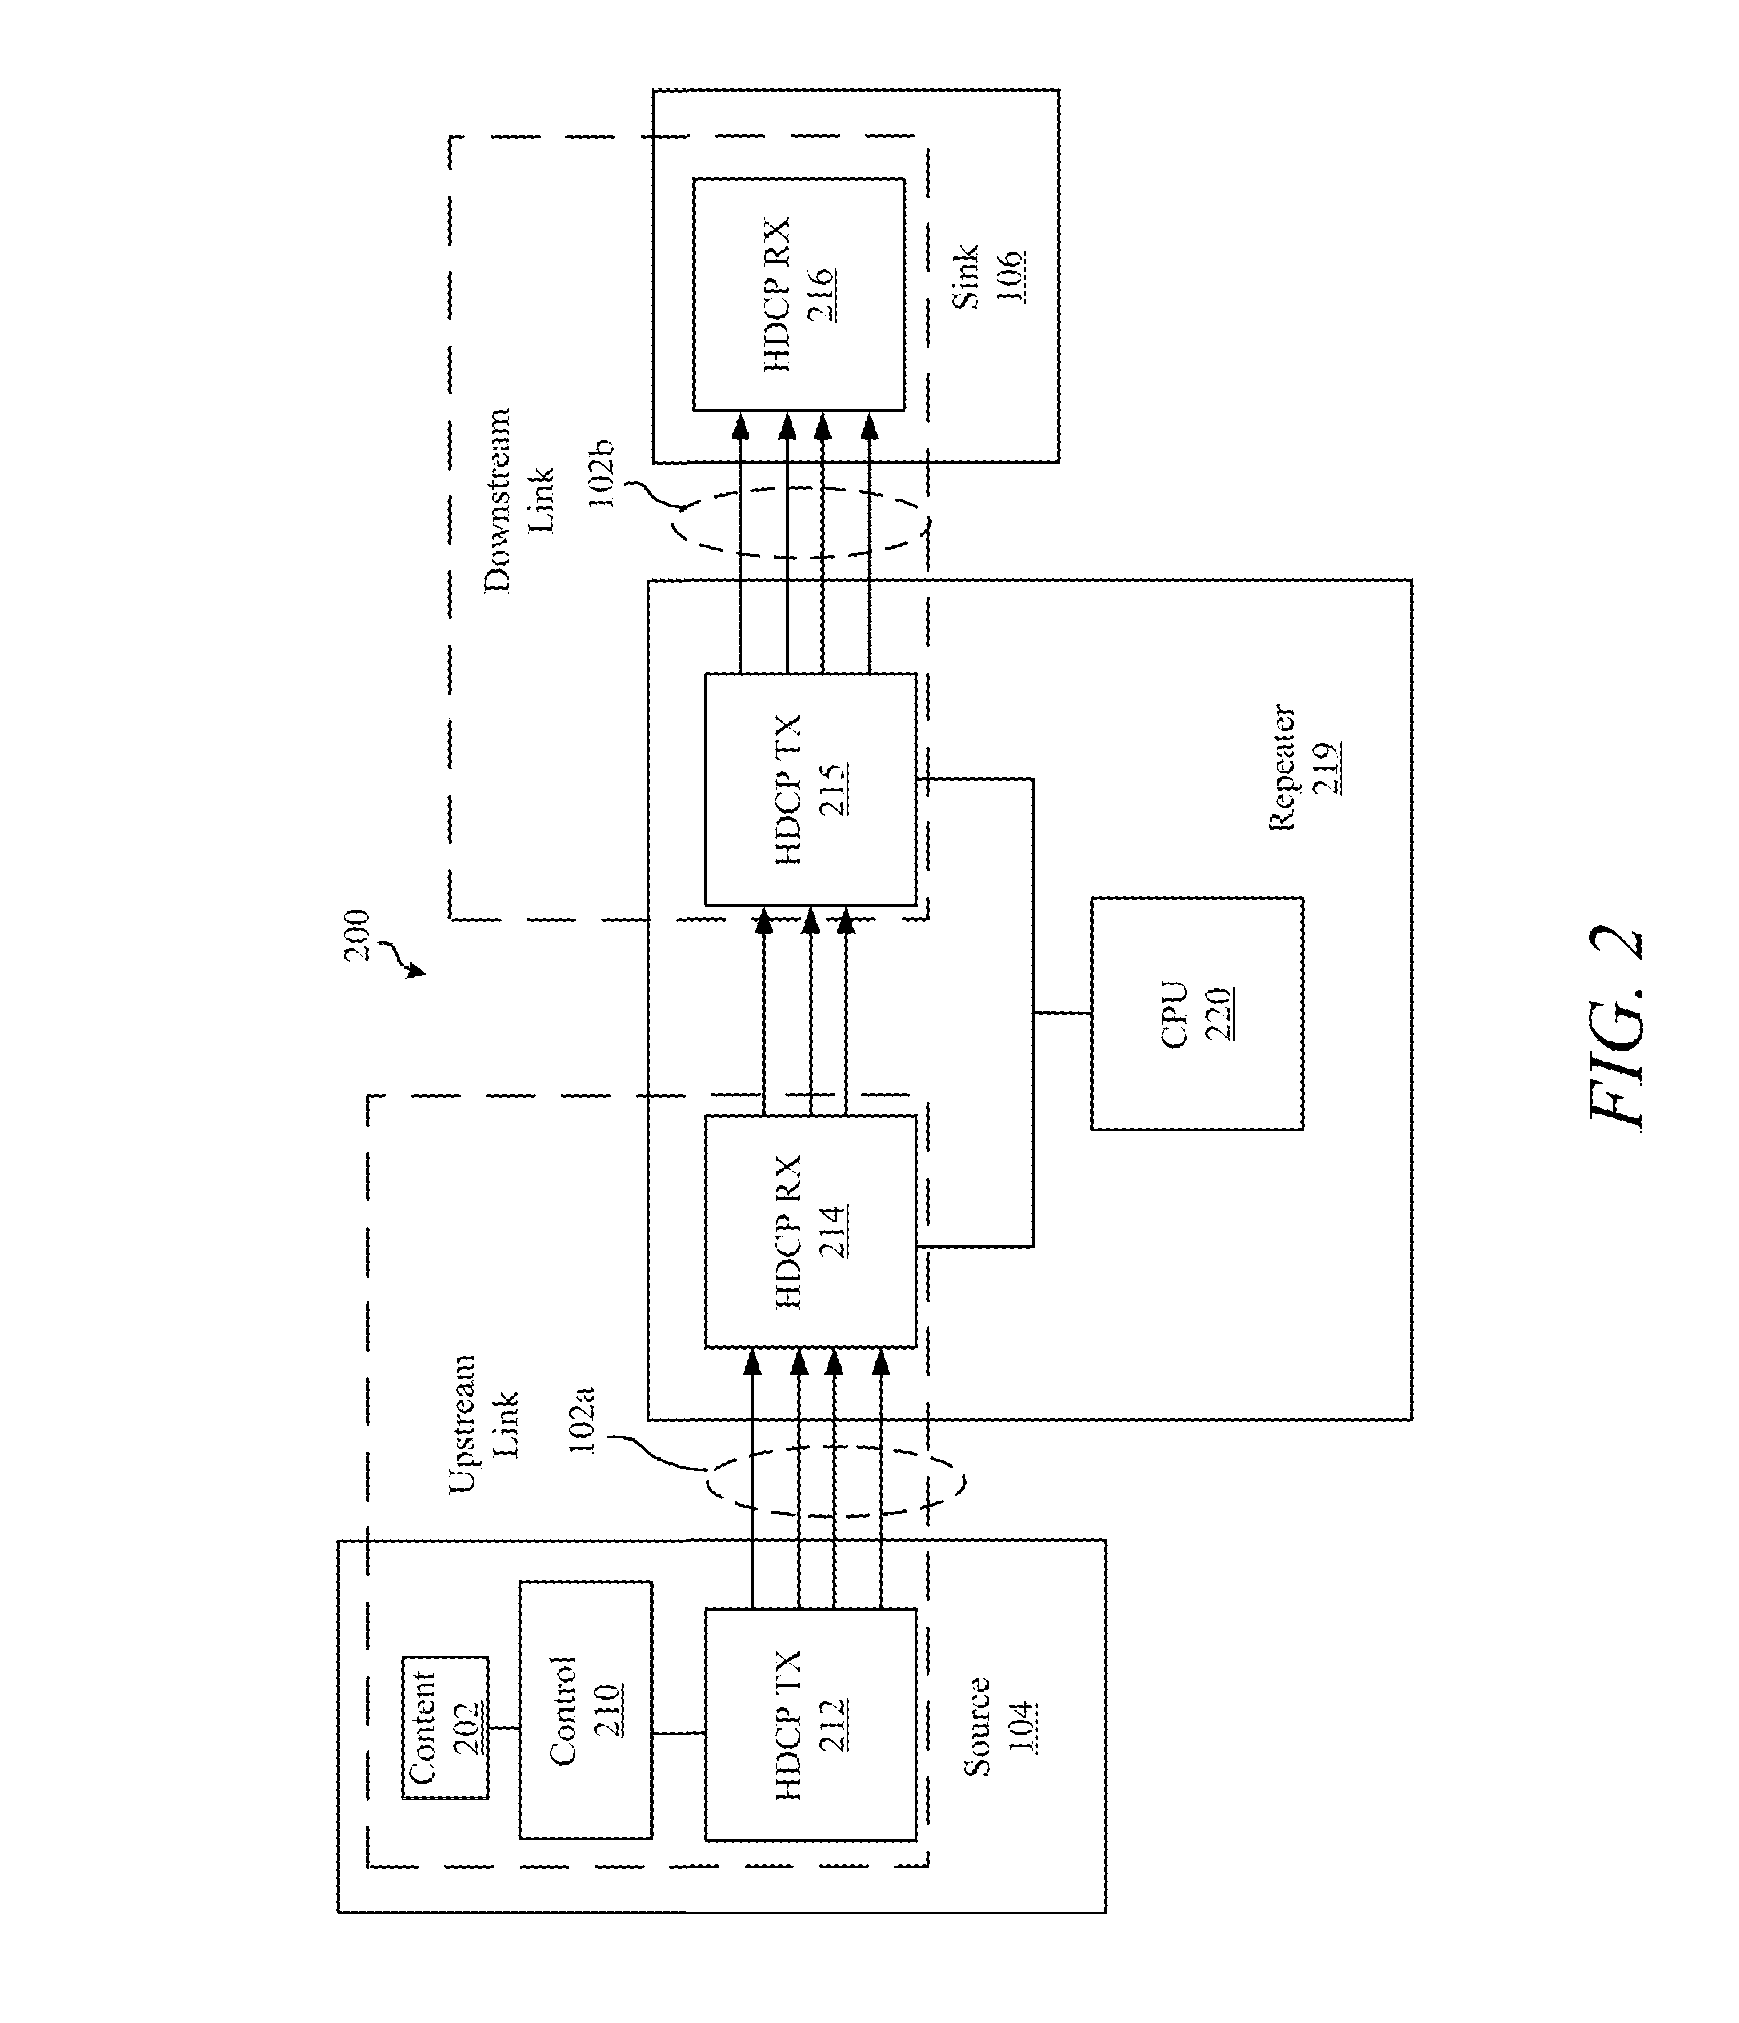 Systems, Devices and Methods for Reducing Switching Time in a Video Distribution Network